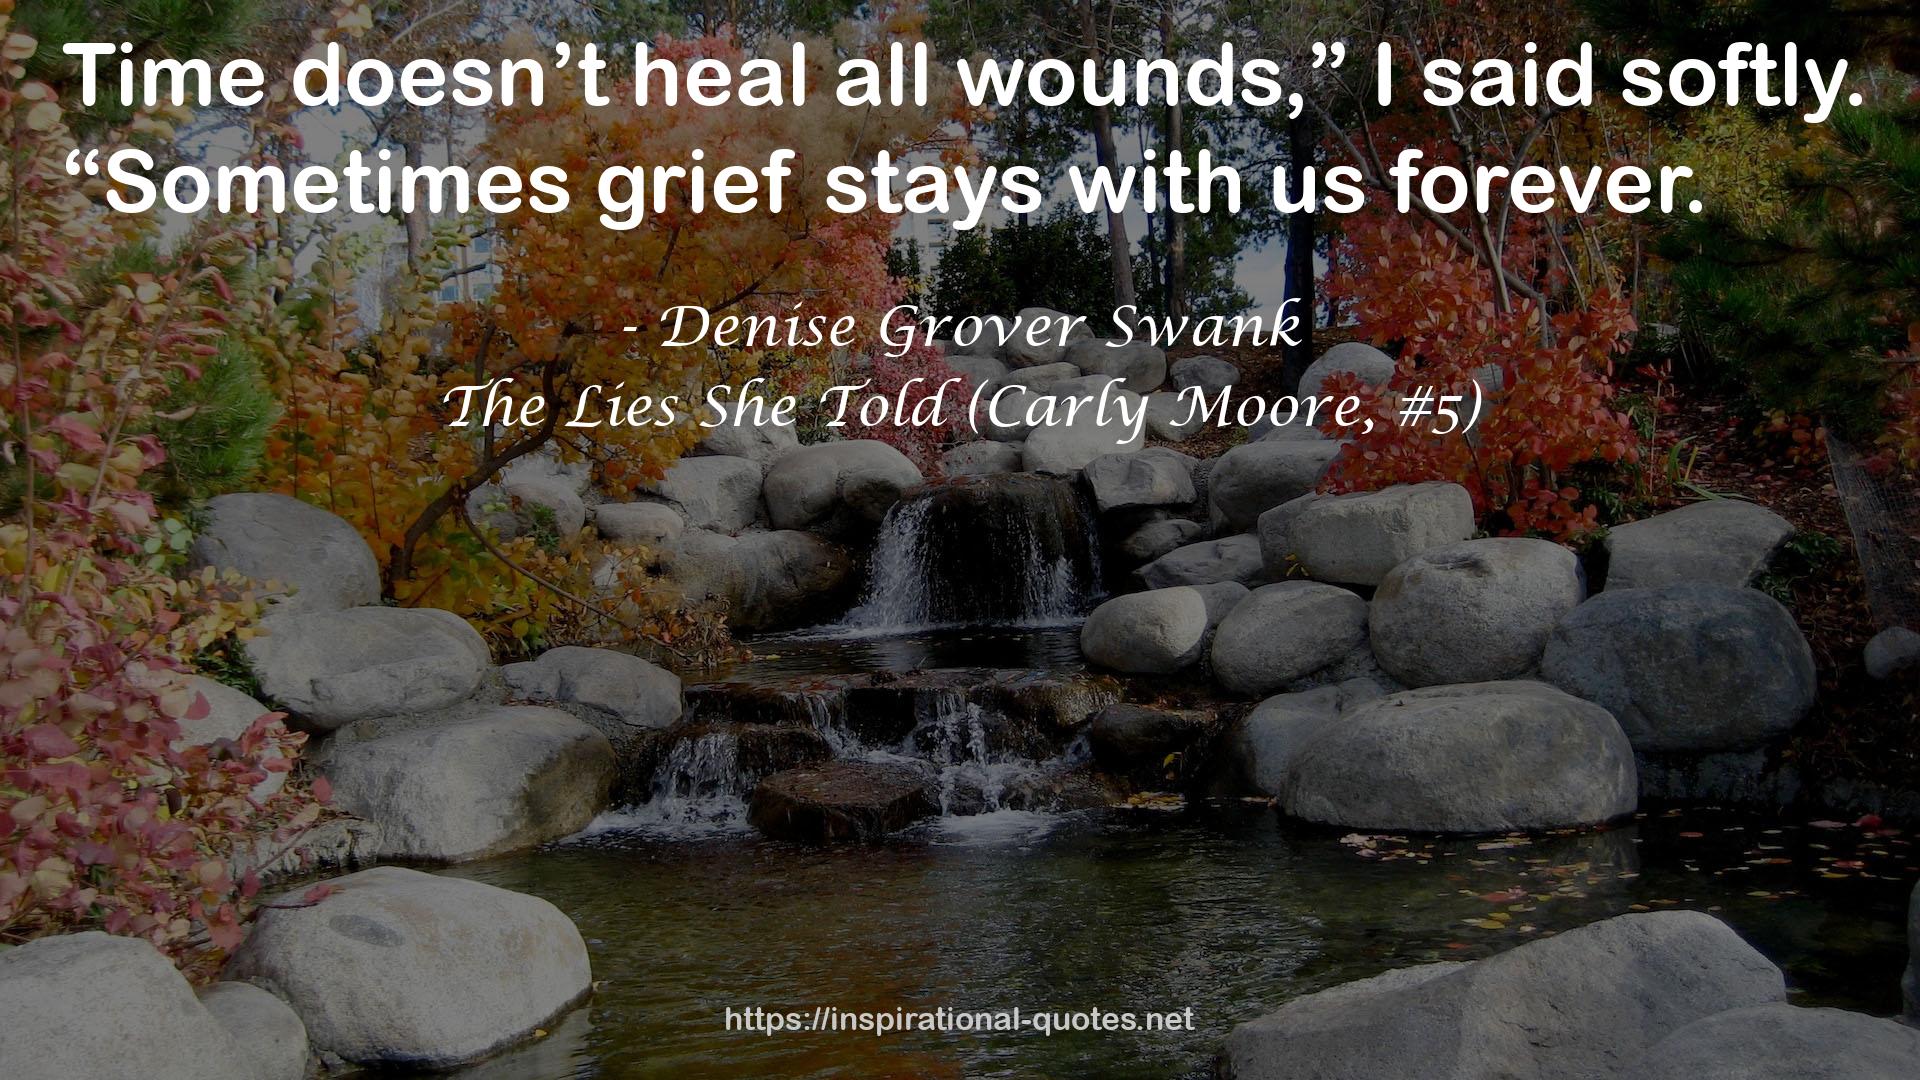 The Lies She Told (Carly Moore, #5) QUOTES